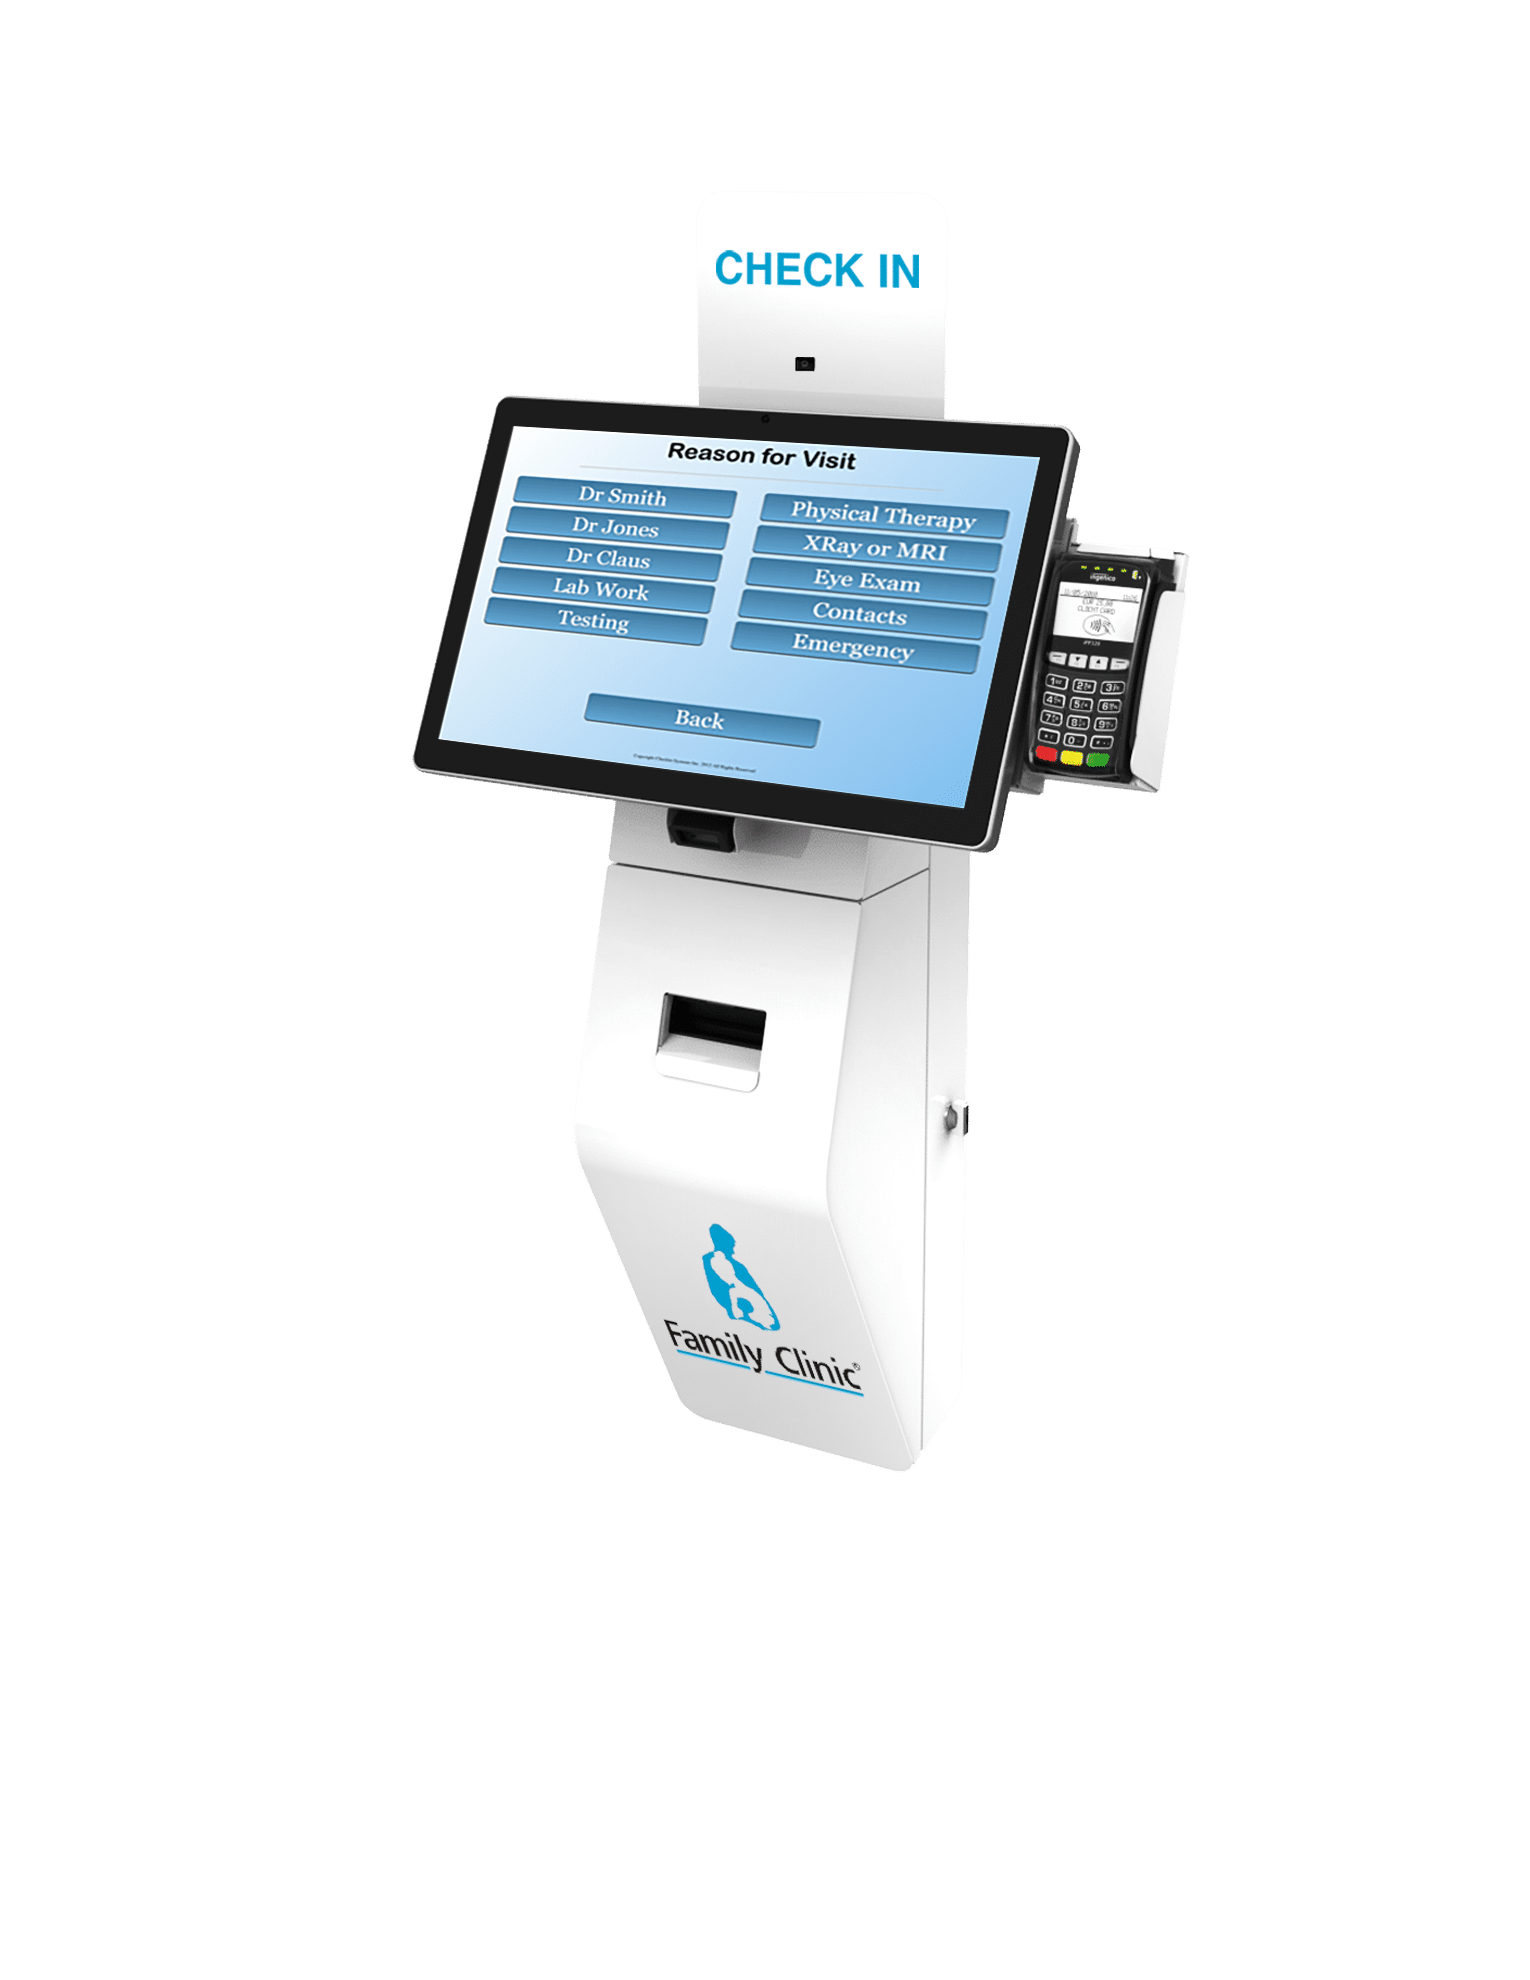 Austin wall mounted kiosk for medical and healthcare organizations